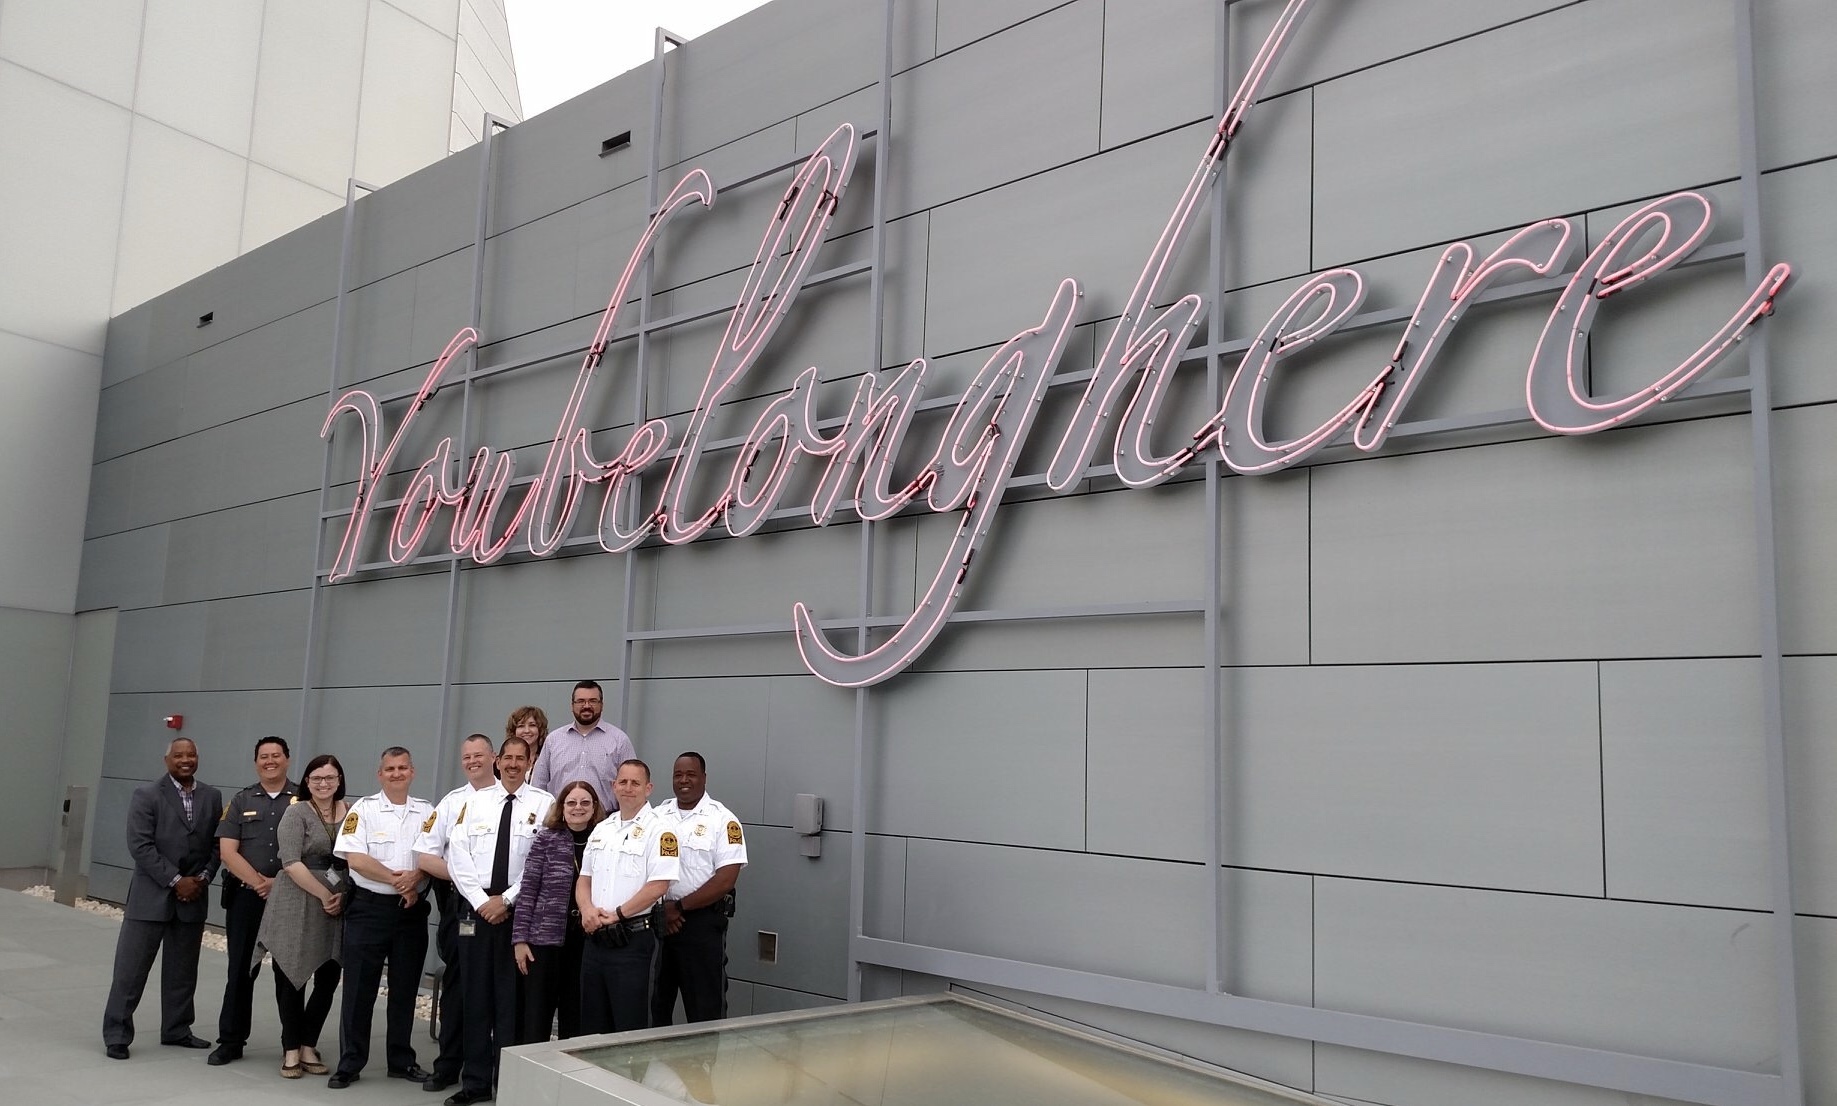 Members of VCU Police standing near Tavares Strachan's "You Belong Here (Flamingo II)" located on the top floor of ICA